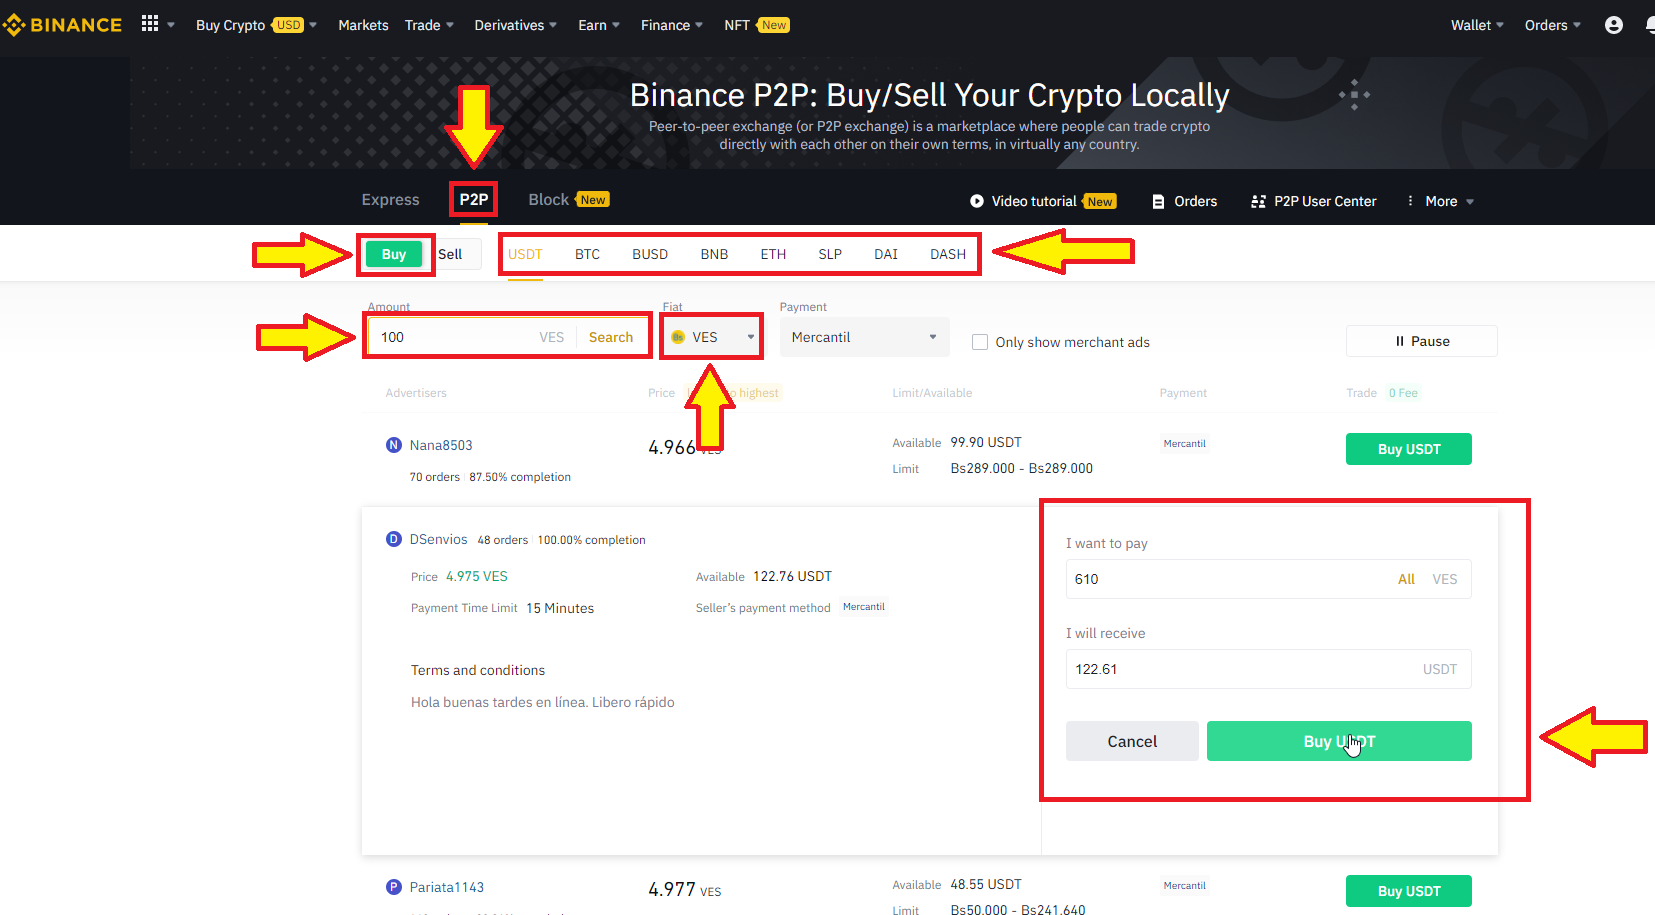 Buy Cypherium crypto in P2P with a verified account on Binance